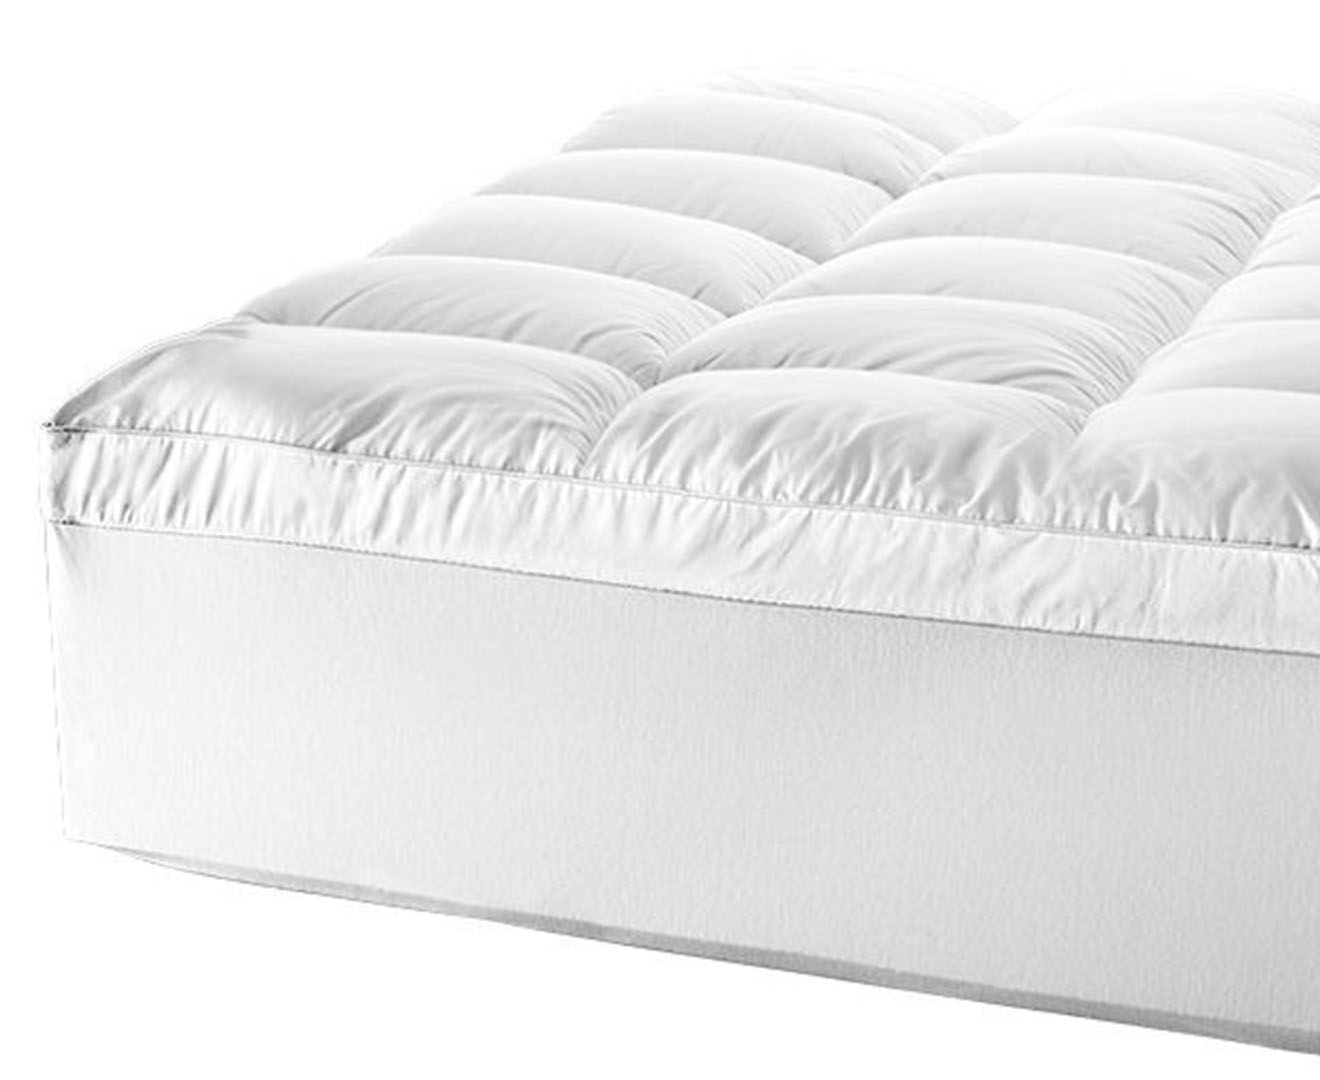 tontine soft and snuggly mattress topper review